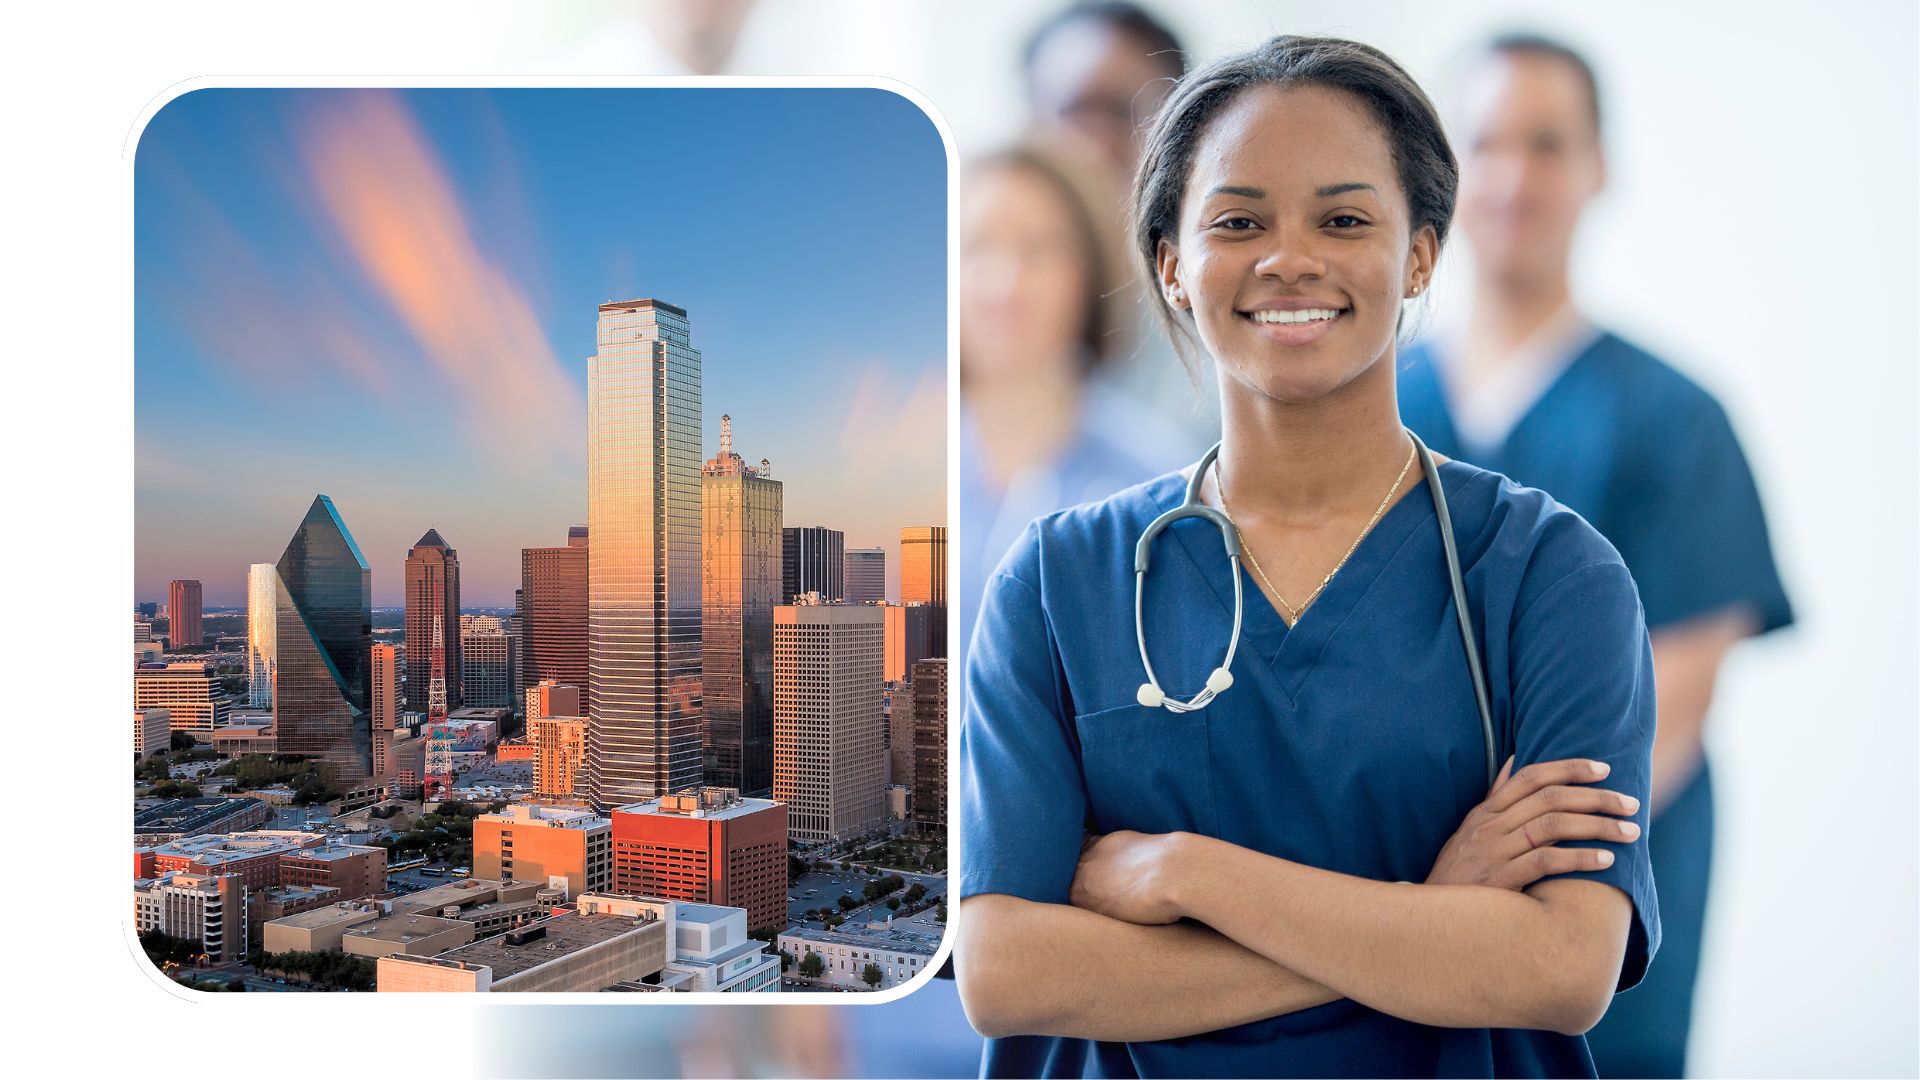 Lone Star Stethoscopes: A Deep Dive into Nursing Careers in Texas